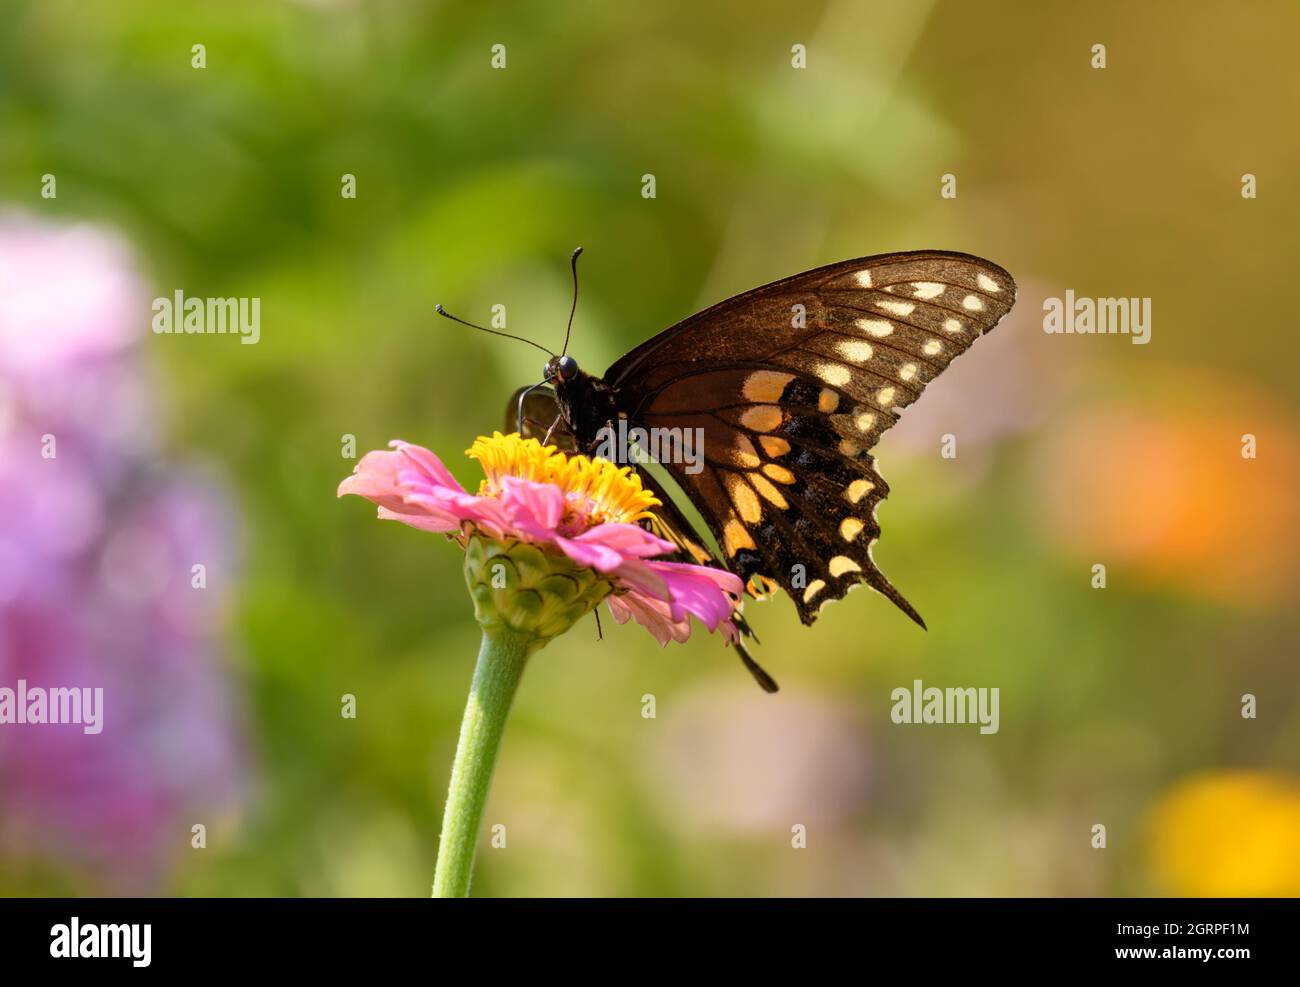 Ventral view of a male Eastern Black Swallowtail butterfly feeding on a pink Zinnia in summer garden Stock Photo